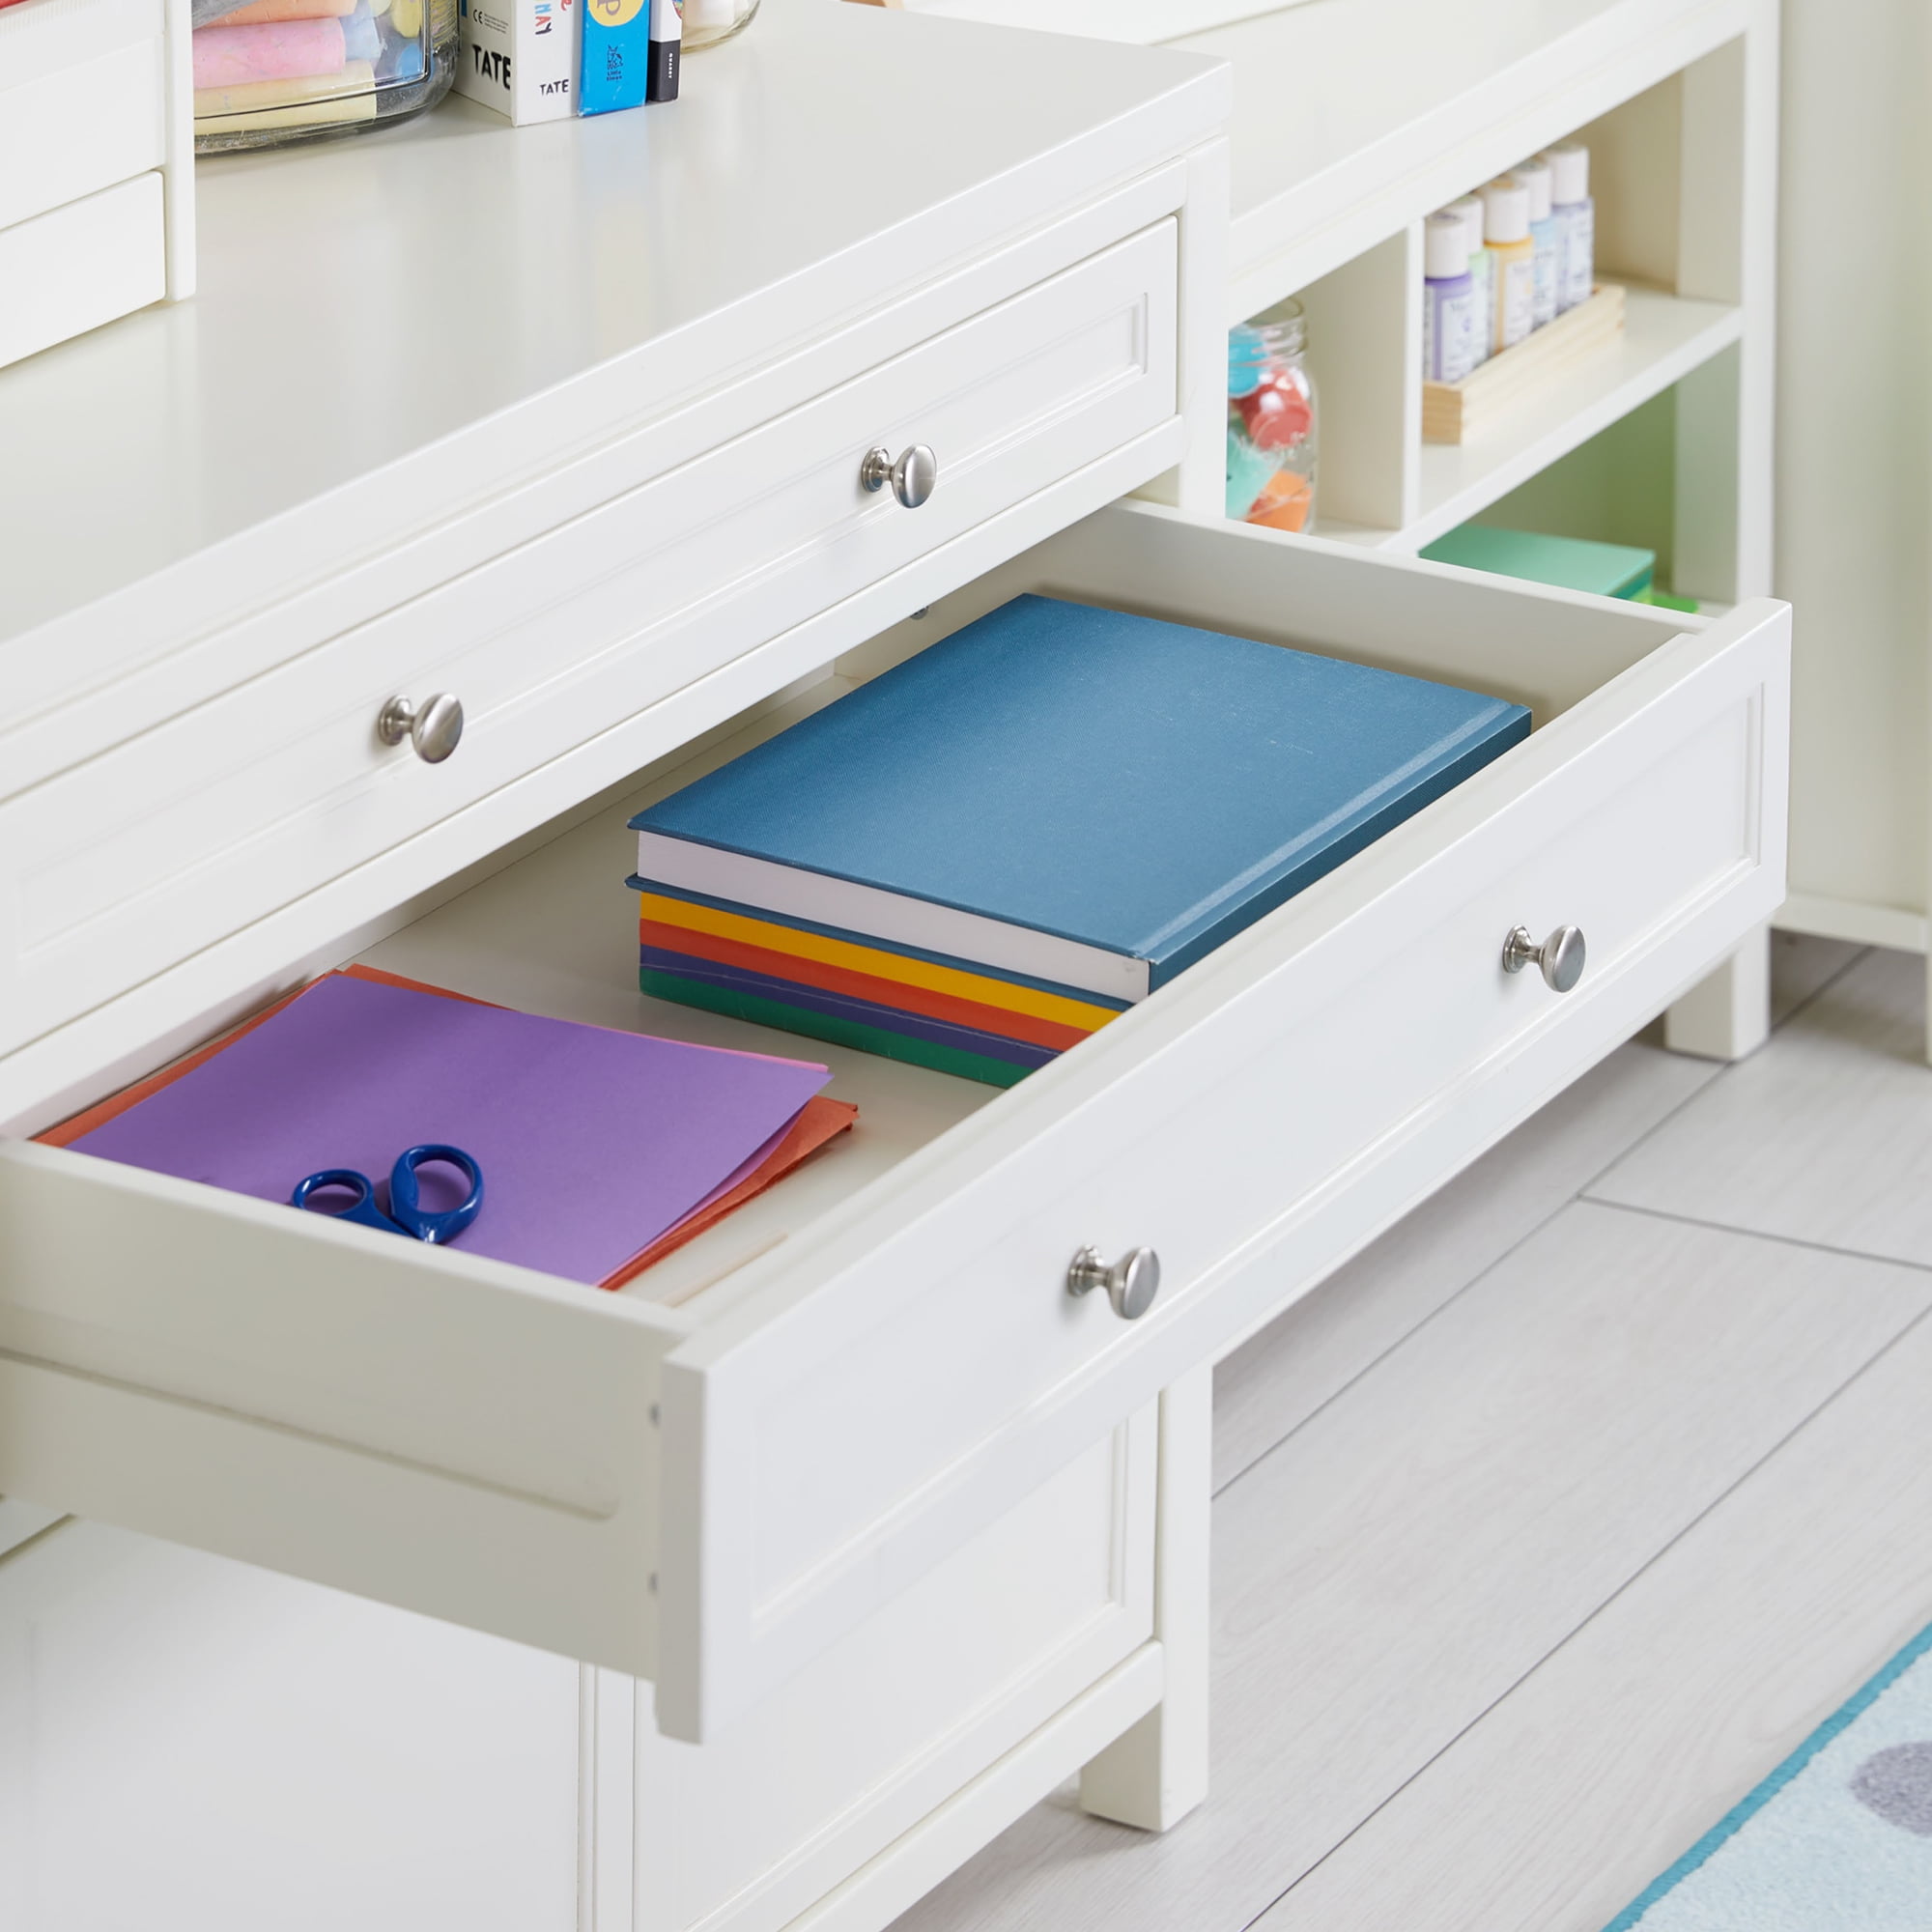 Martha Stewart Crafting Kids' Artwork Storage - White, Wooden Art Supply  Storage Cabinet with Drawers, Crafting Organization for Paper and Tools 